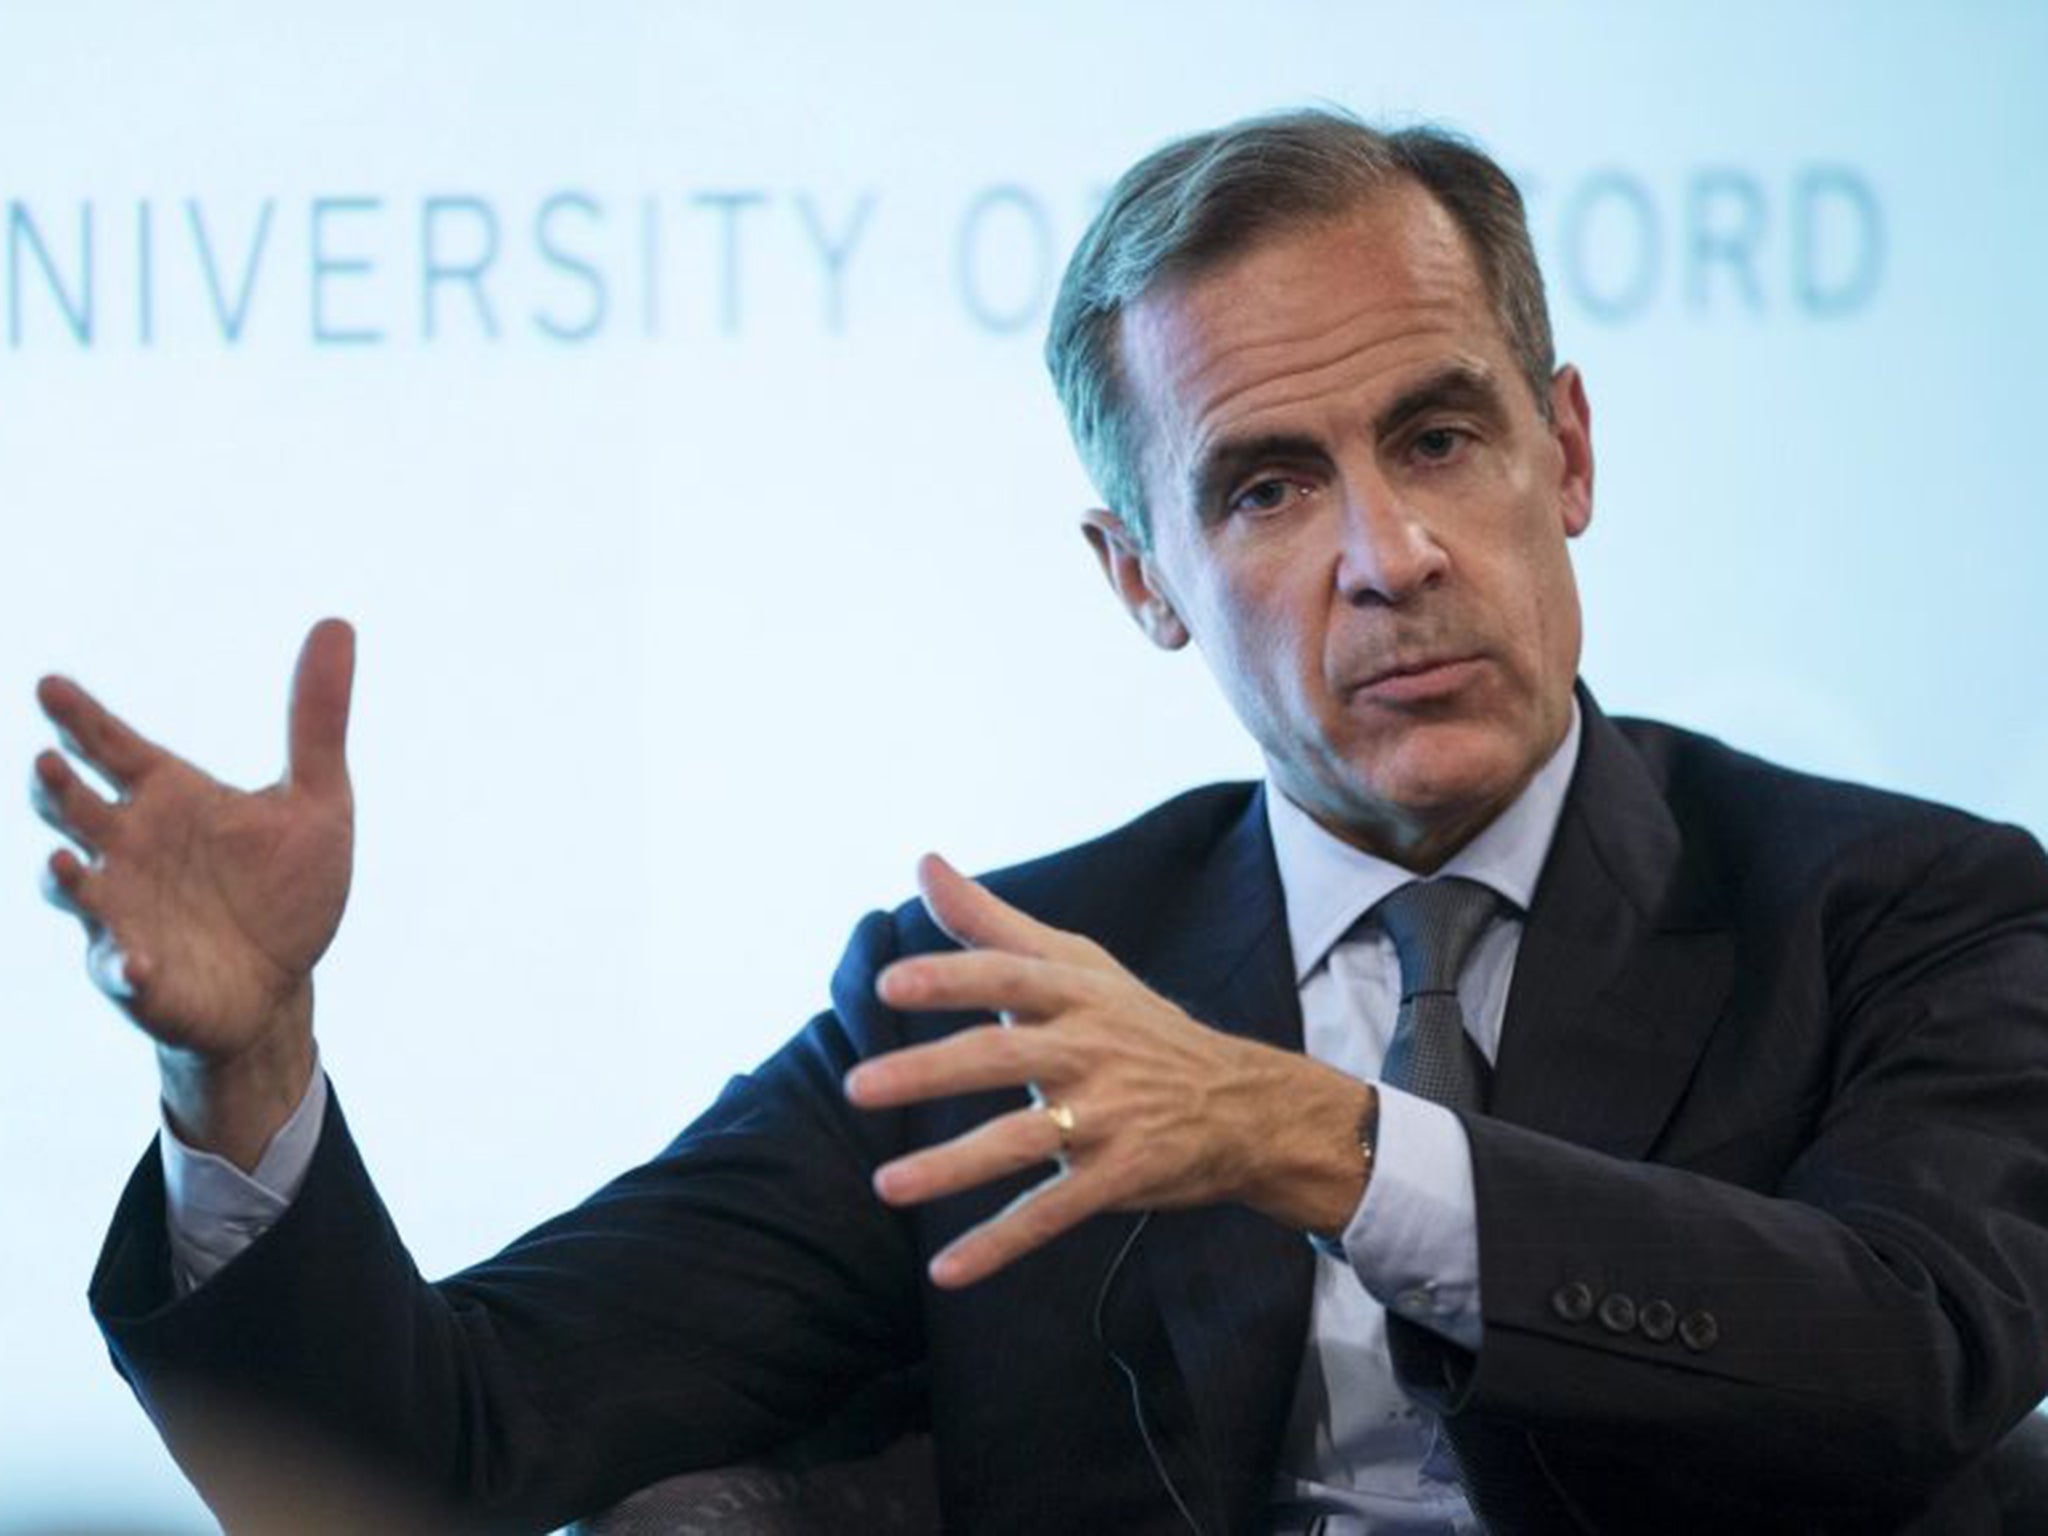 Mark Carney may not be entirely justified in implying that all of the UK’s relative economic revival since the 1970s has been down to joining Europe